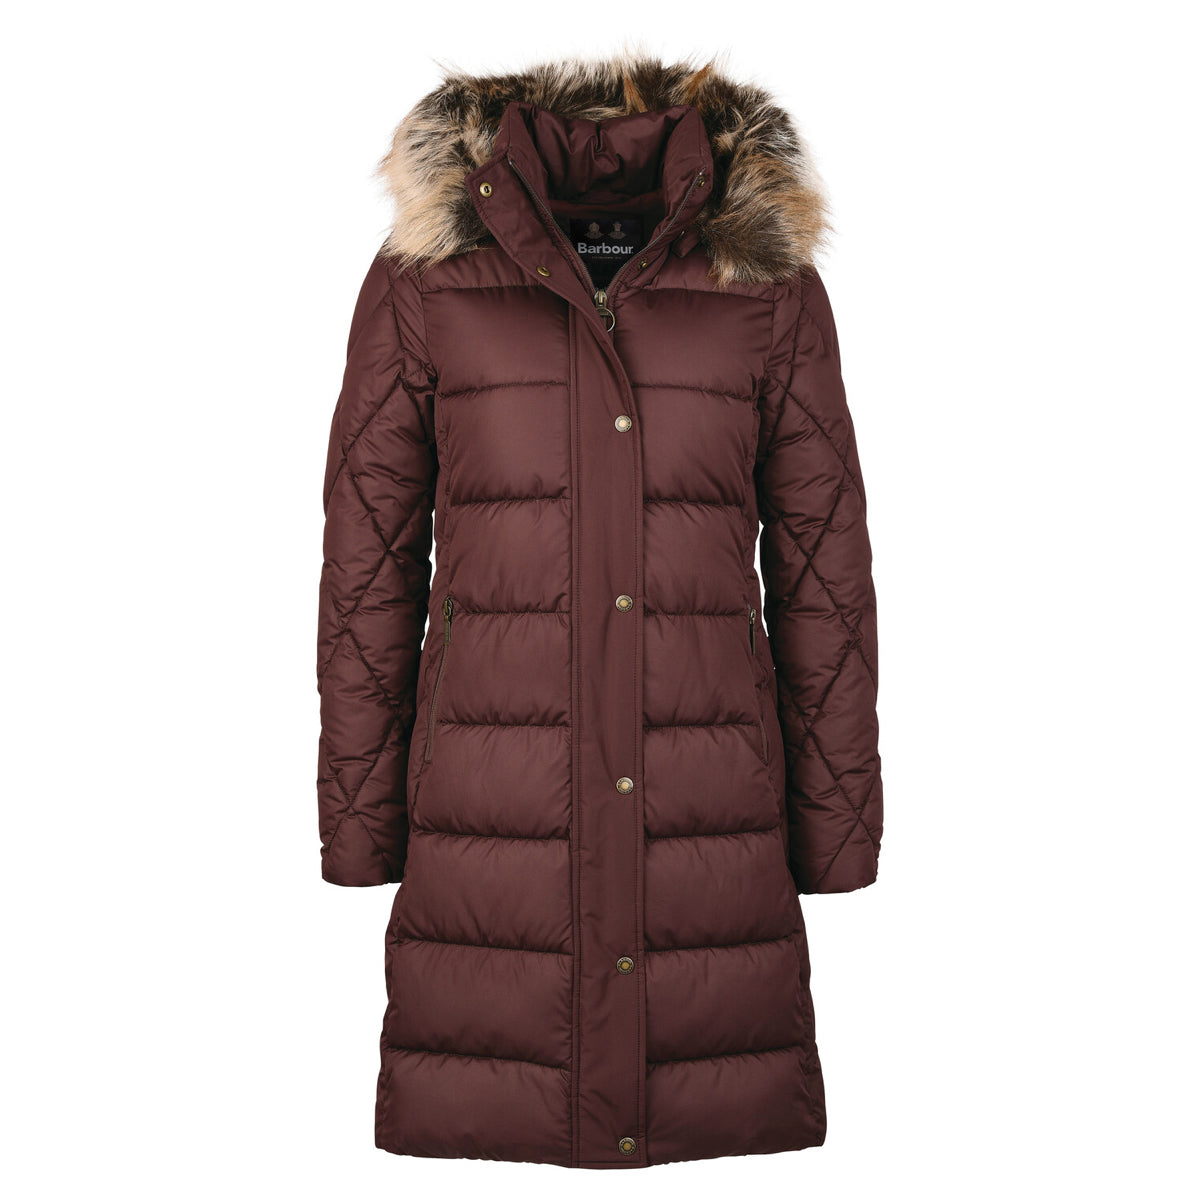 Barbour Daffodil Women's Quilted Jacket | Windsor